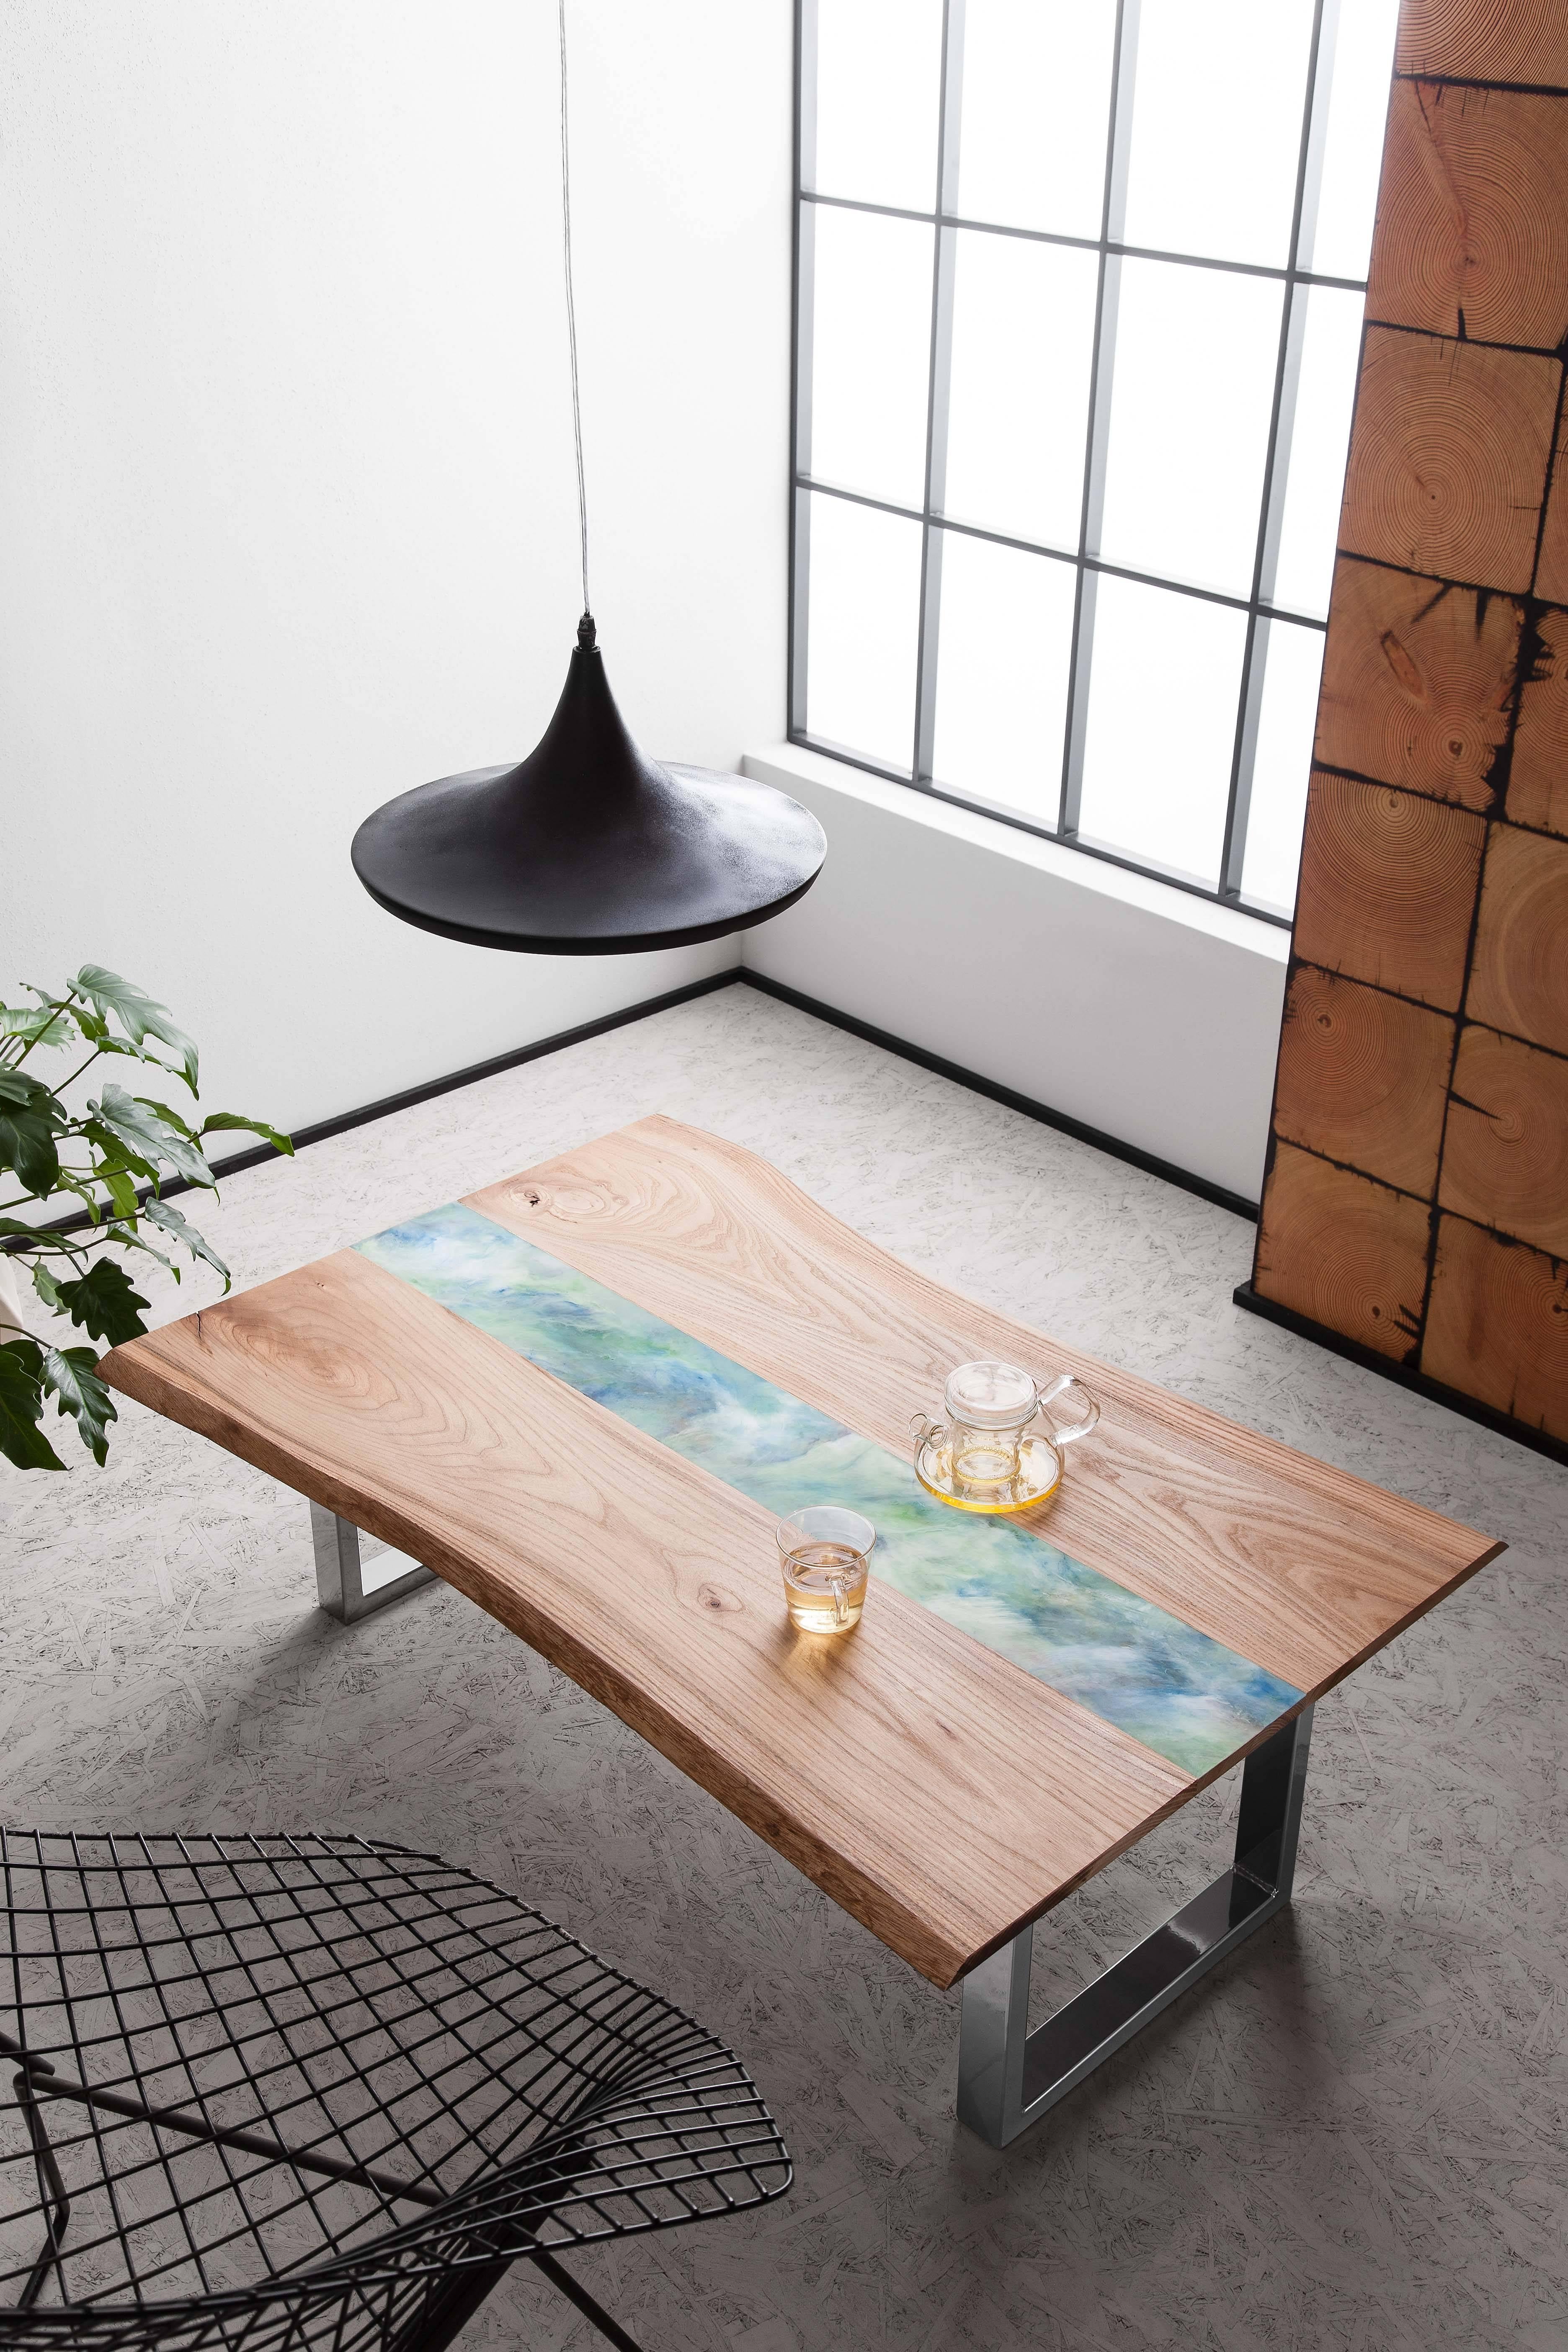 New for 2017, the resin art tables fuse natural live edge boards with flowing lines of hand poured resin art. 
Sustainably sourced live edge English Elm (which can be traced to the individual tree) is paired with resin inlay in a variety of colours,